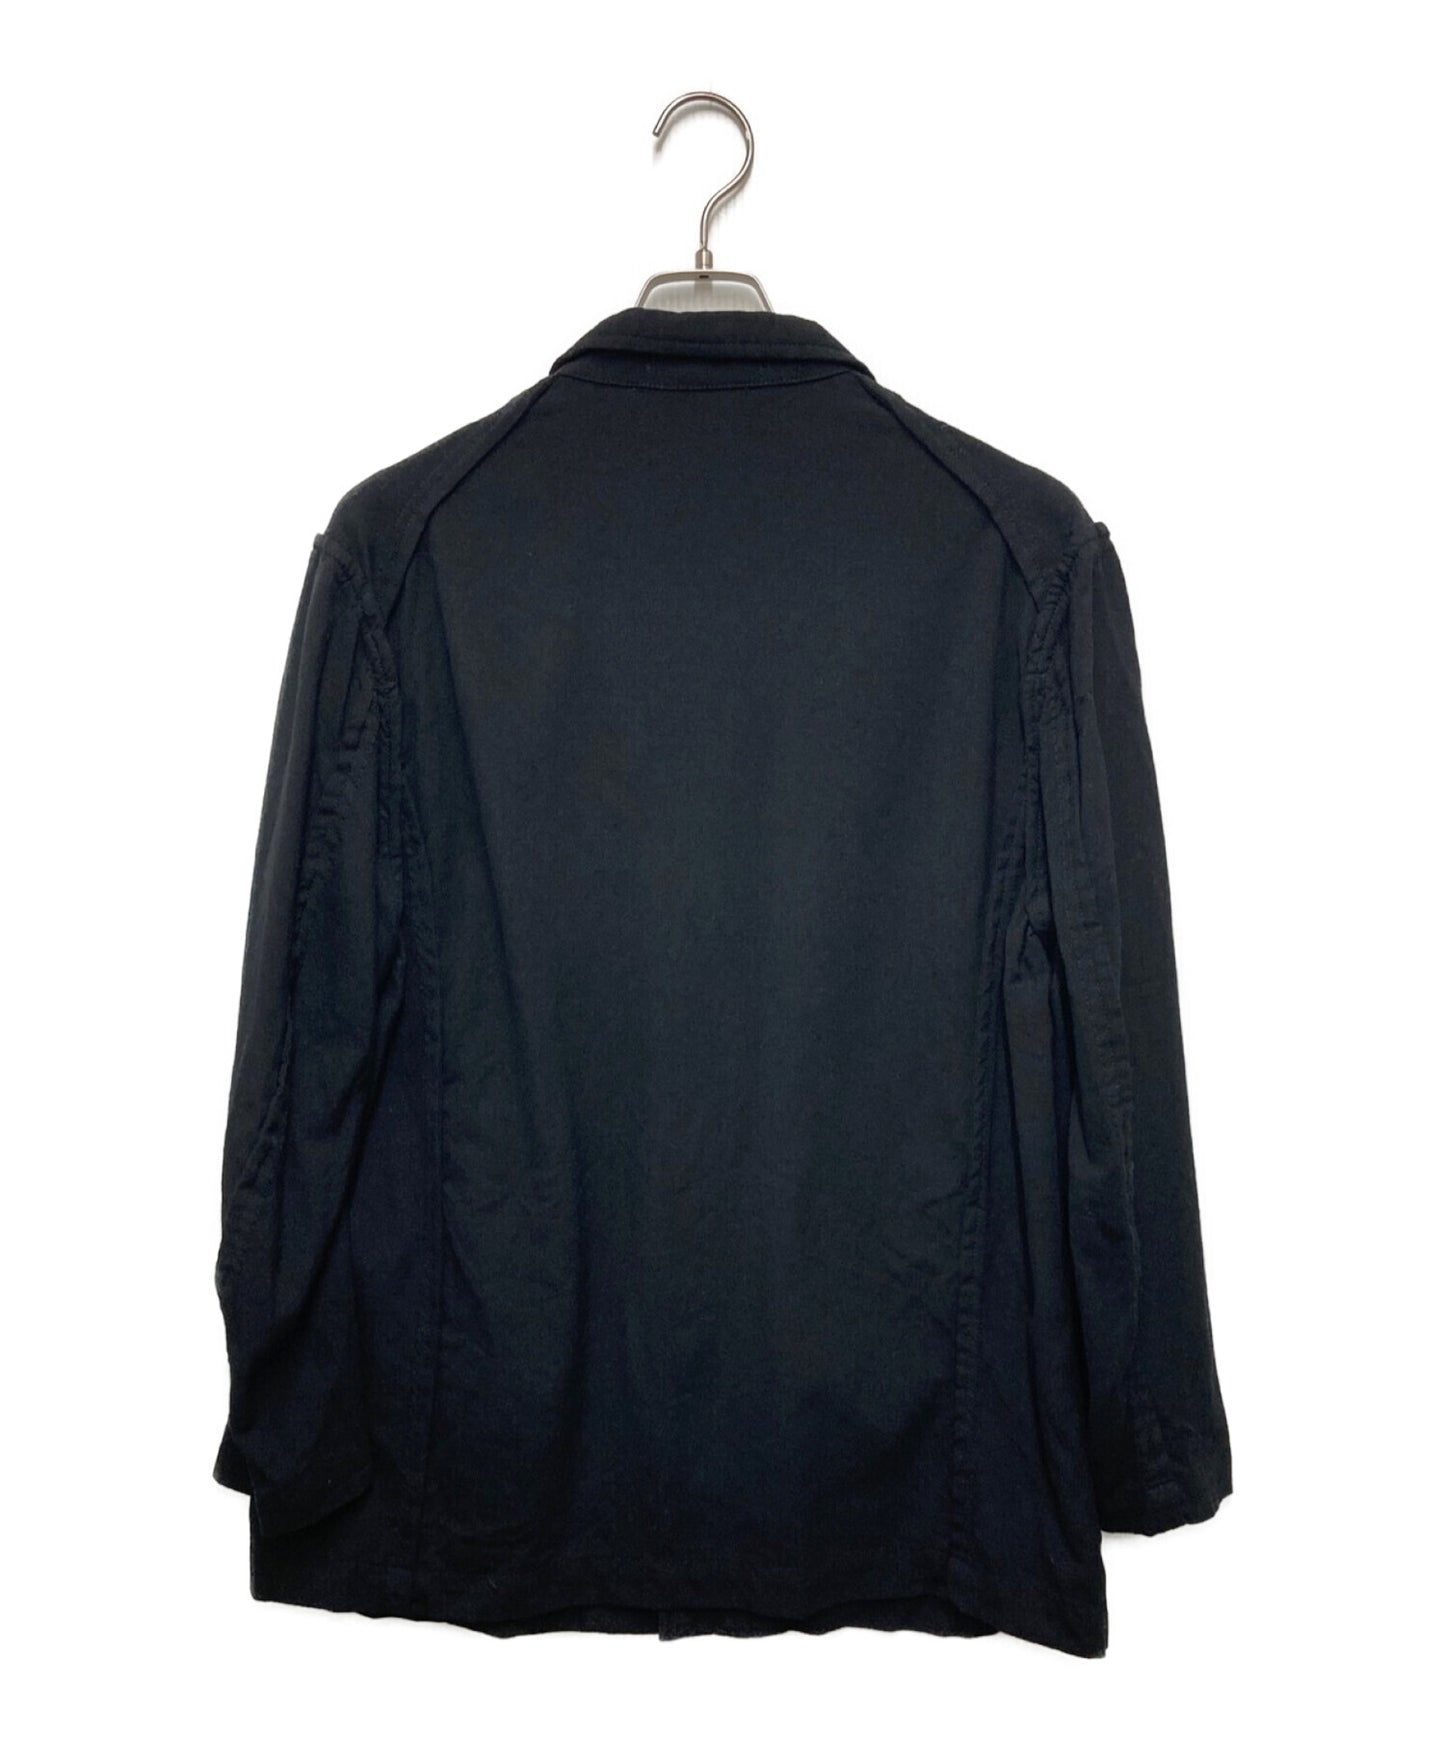 Comme des Garcons Homme Plus Inside-Out Seam Jacket 1998AW Inside-Outside时期档案PJ-04019S